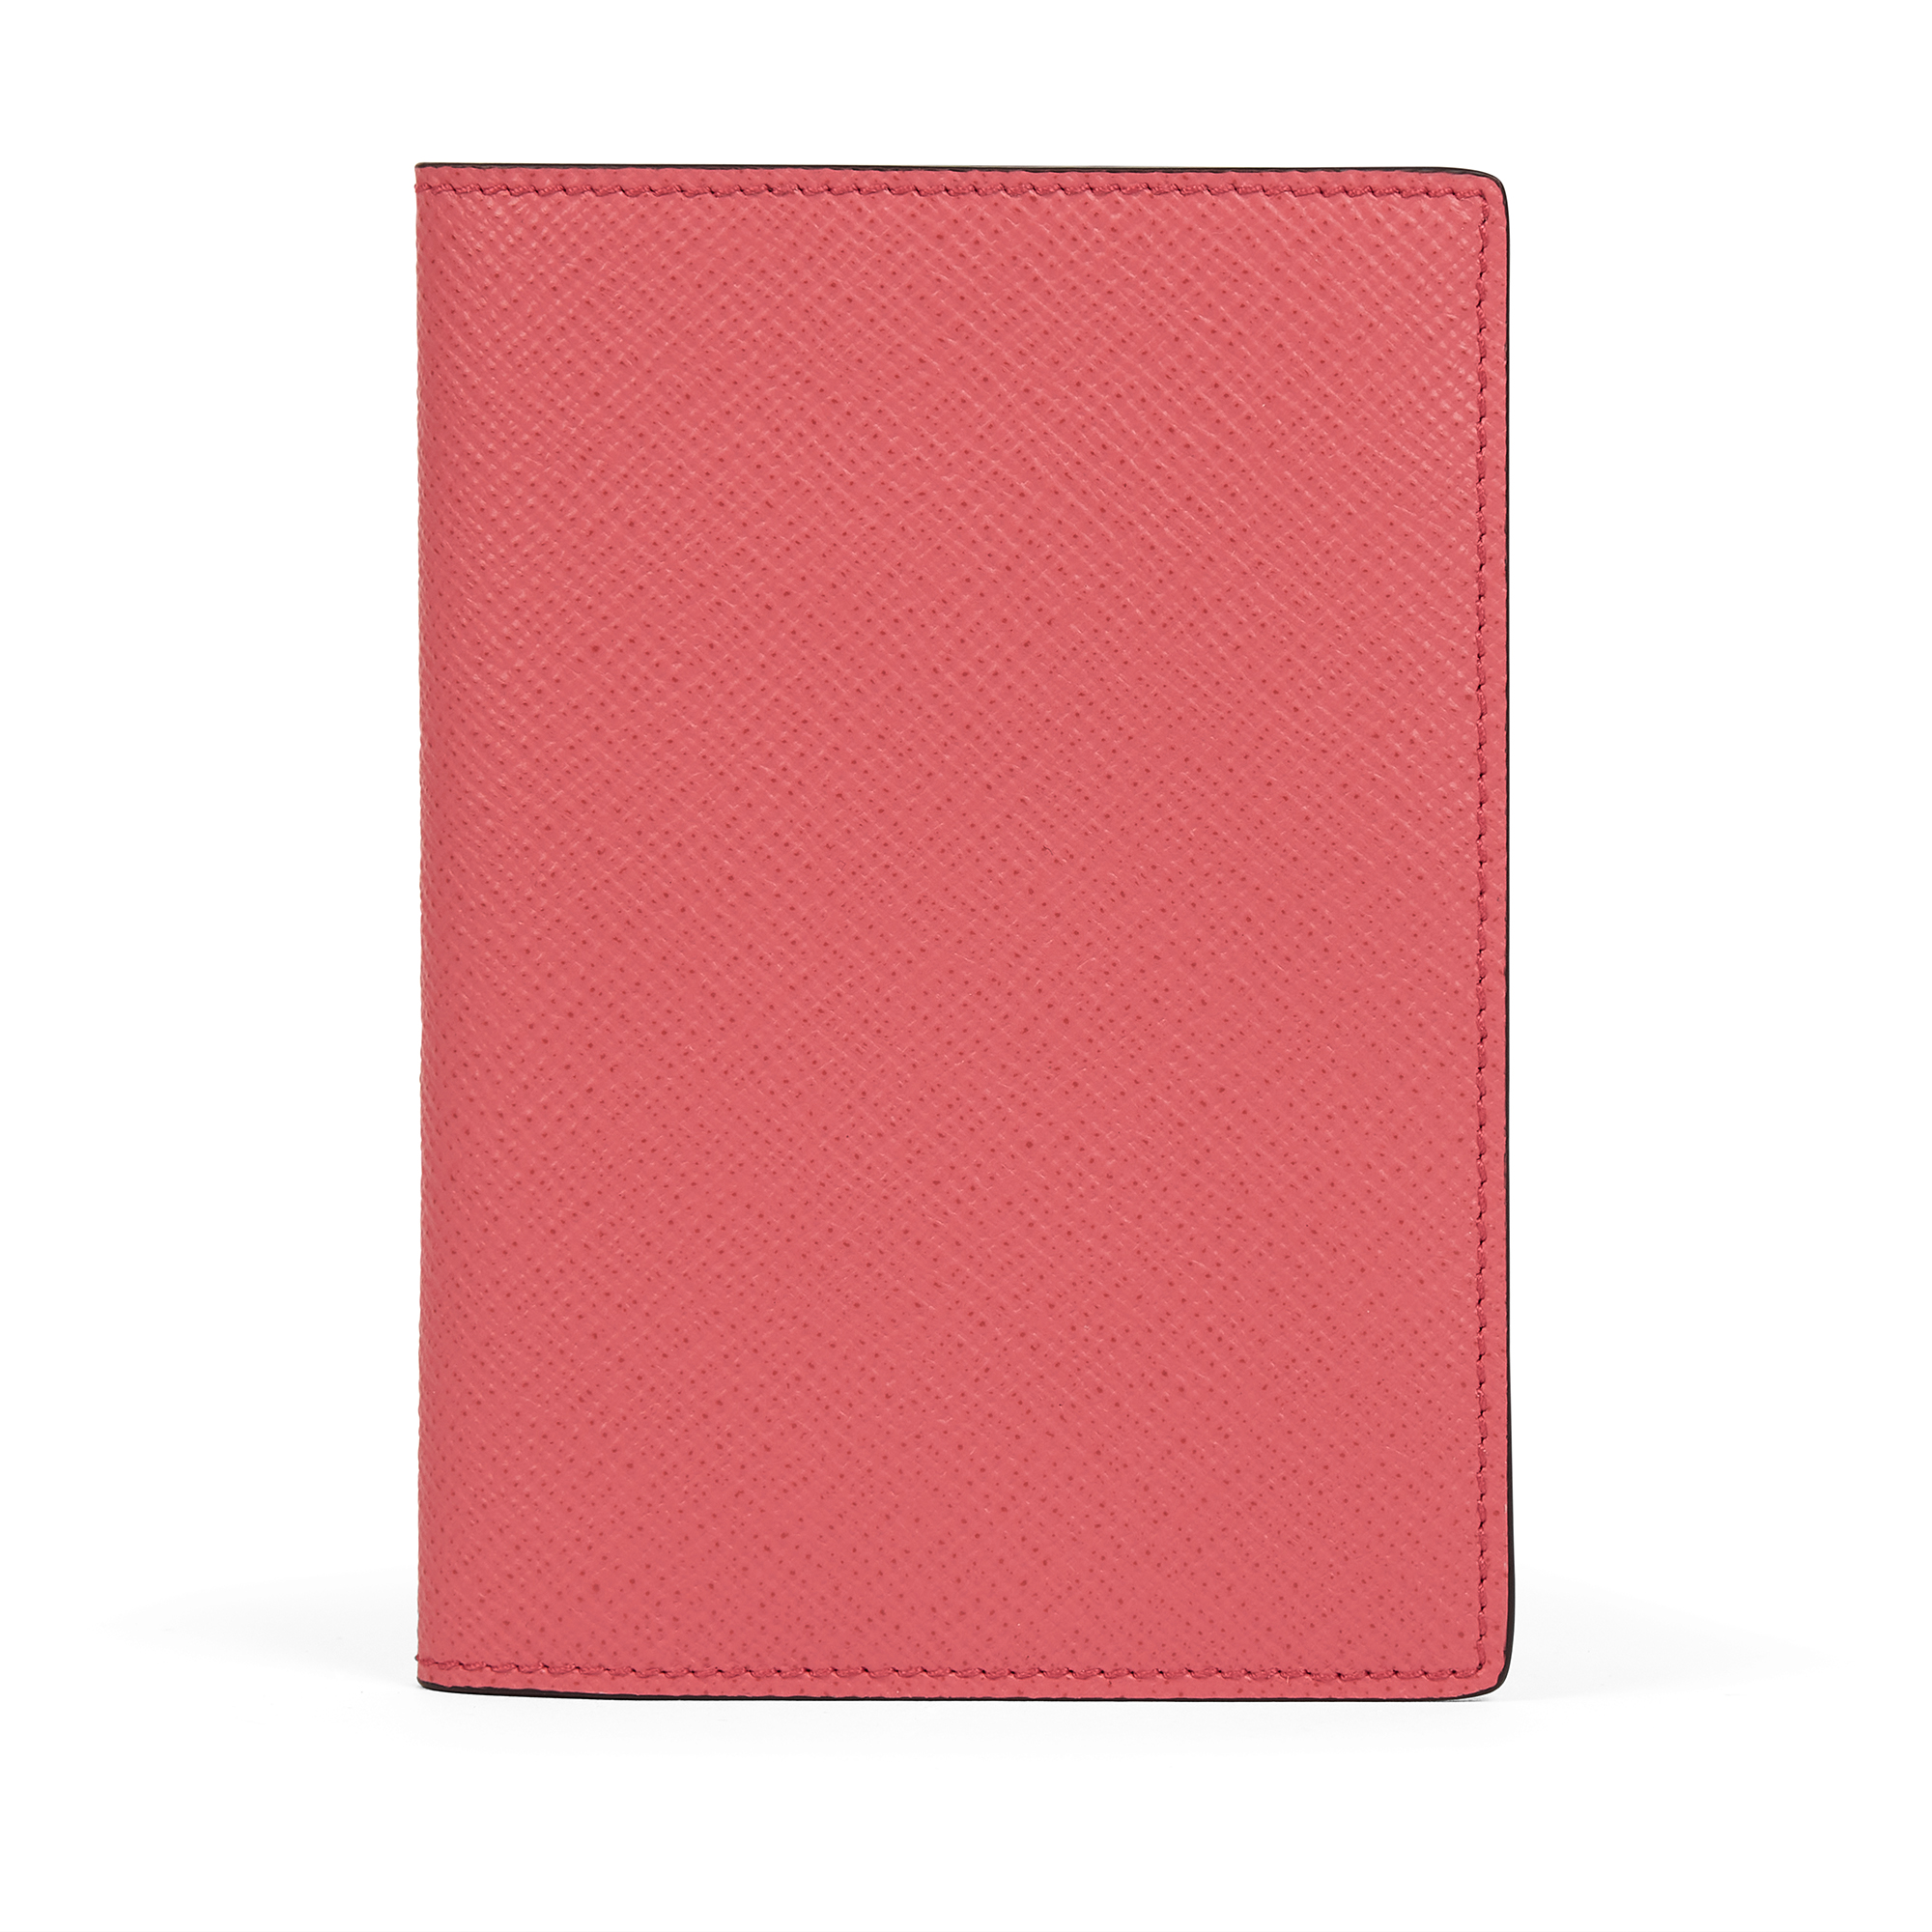 Smythson Passport Cover In Panama In Coral